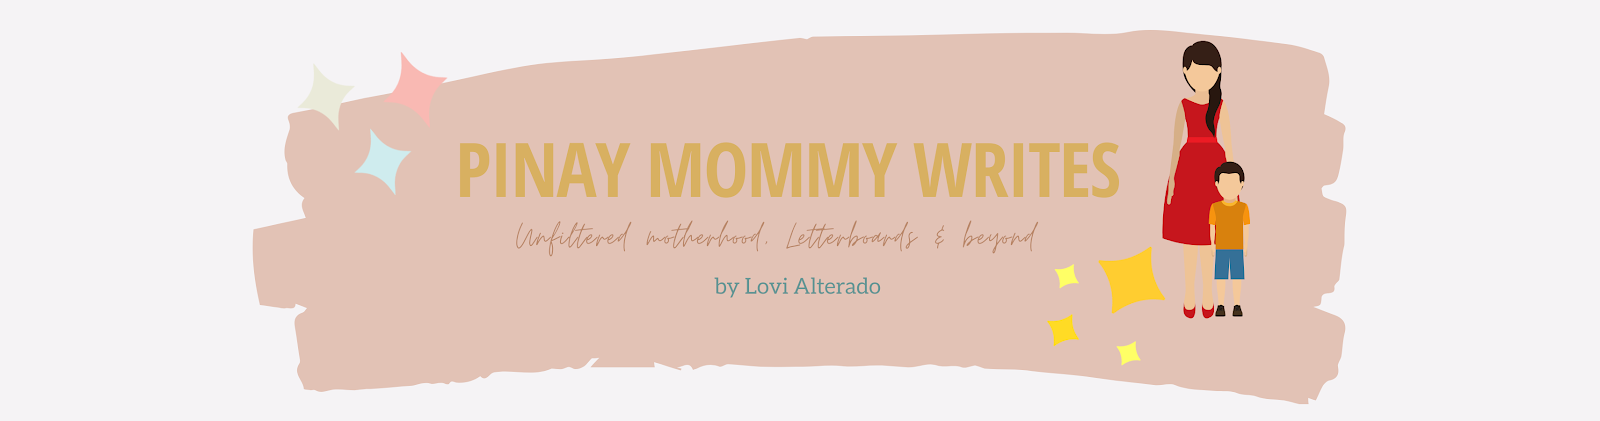 Pinay Mommy Writes